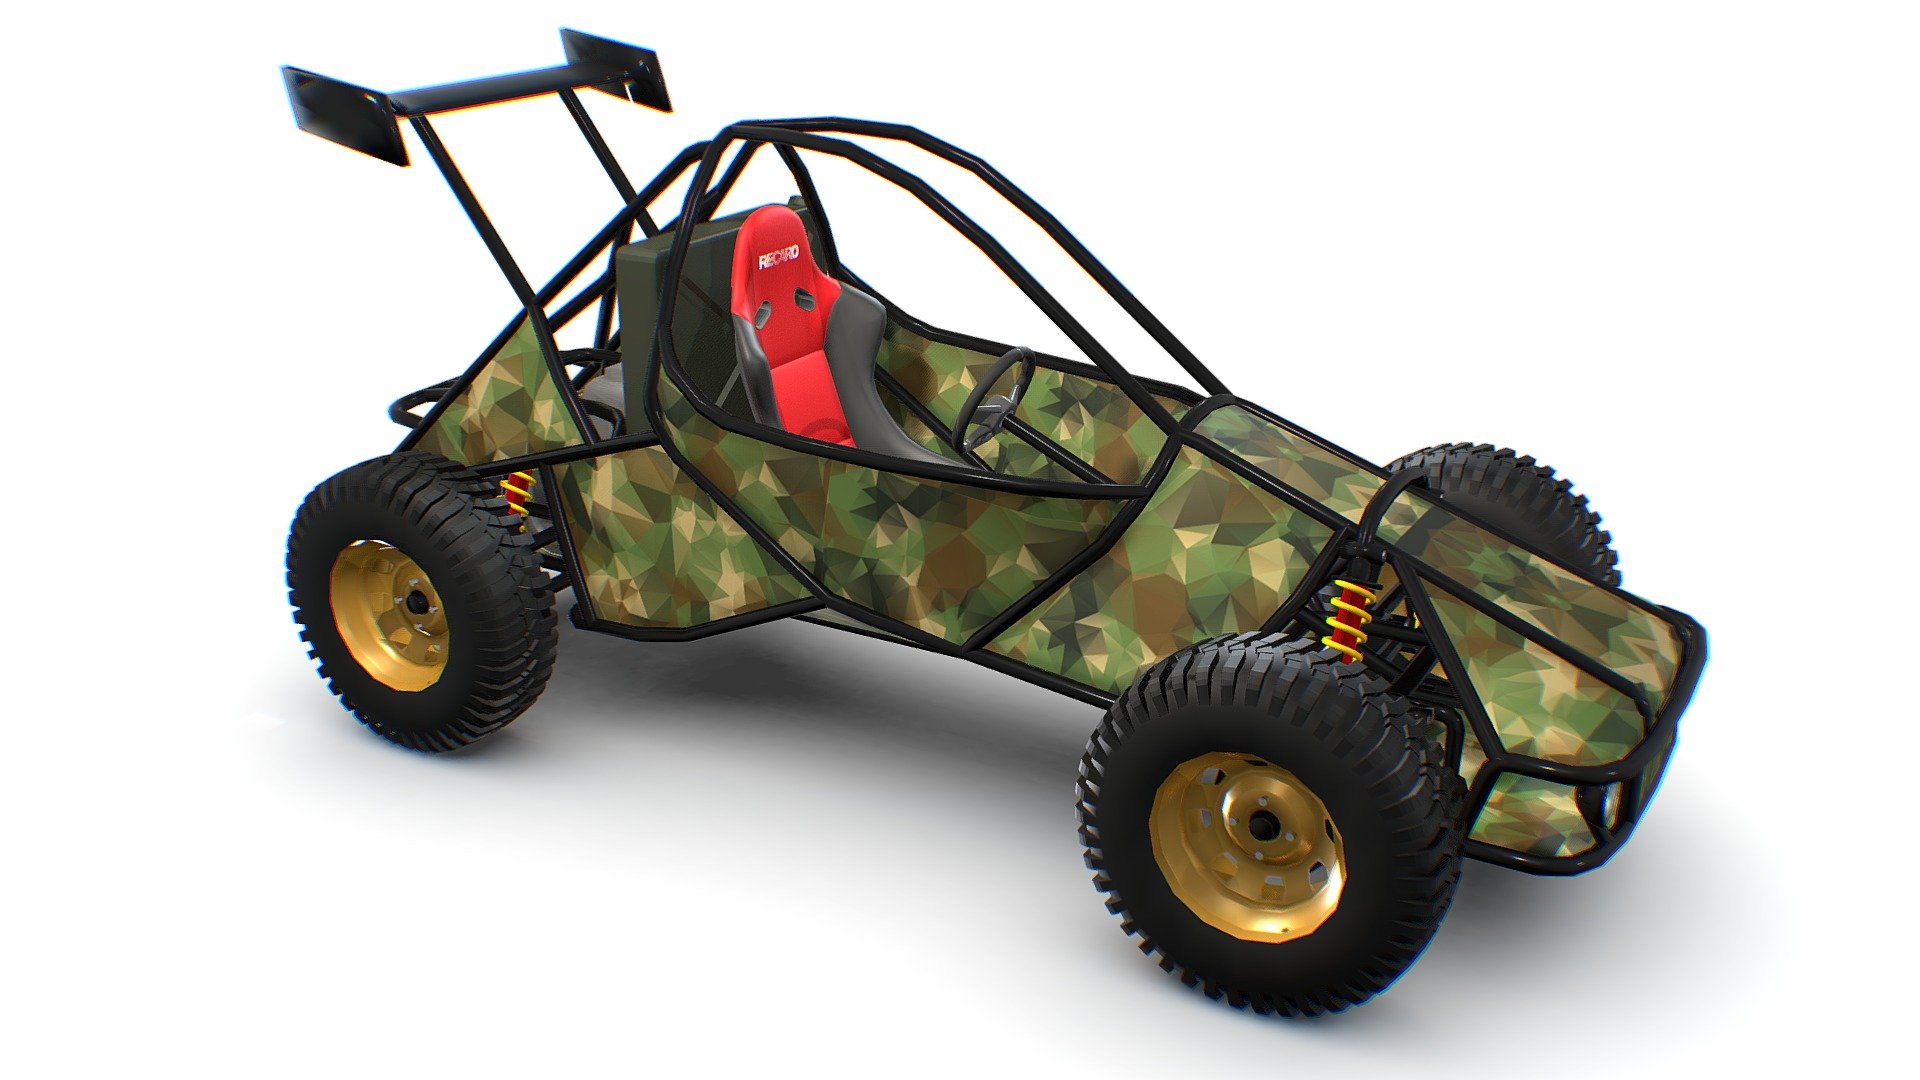 4x4 Off-road Buggy Extreme Sport


A model with blender 3.2
Cycles render engine used.
Also, use with the EEVEE render engine
Materials and textures
Low-poly Design
UV unwrap
Game-ready
3D printable

Suitable for,


off-road game
animation
concept animation
movie,
advertiesment
and many more.

Just buy and Import to your project 3d model